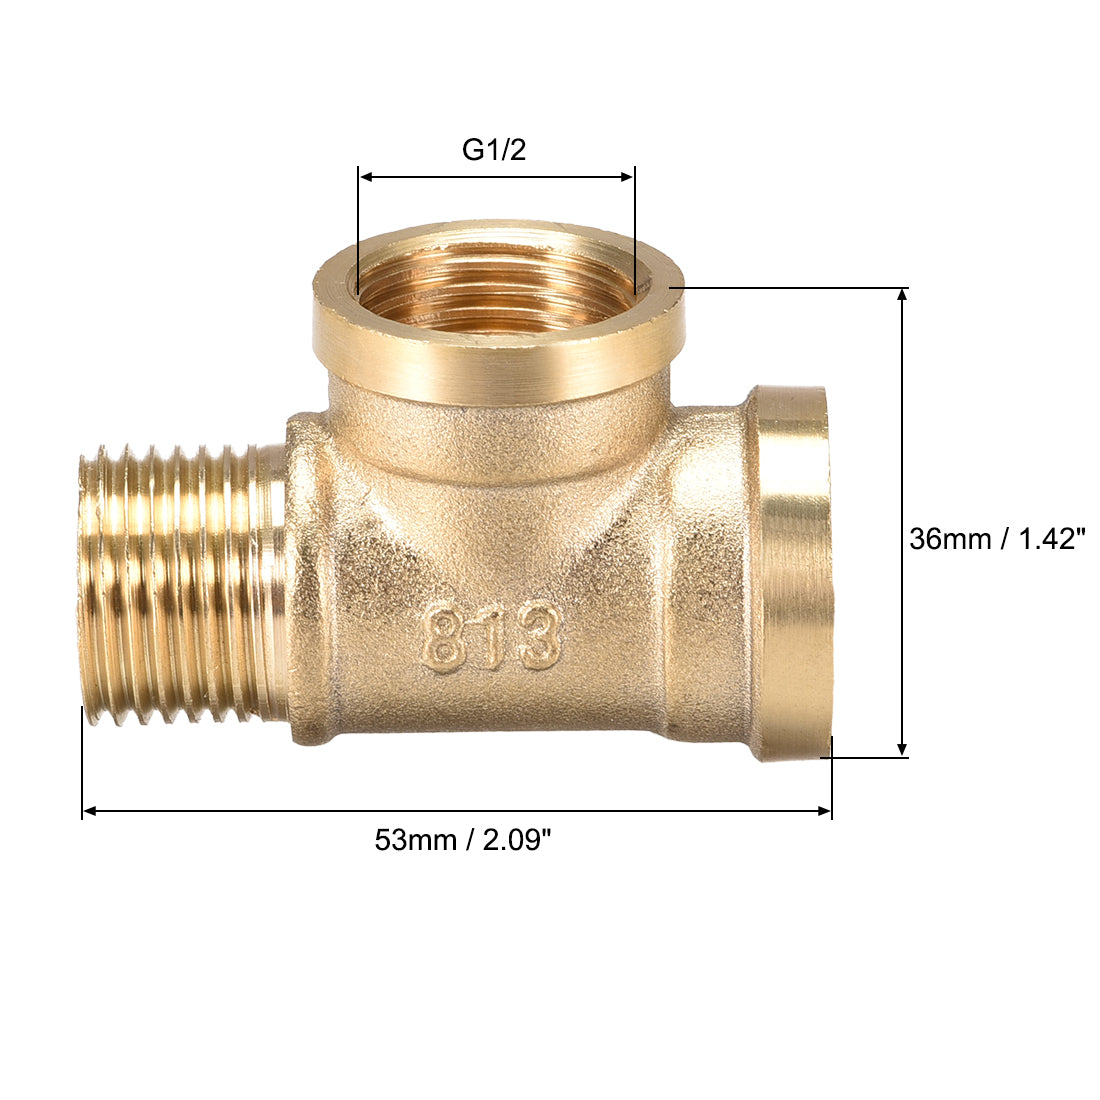 uxcell Uxcell Brass Tee Pipe Fitting G1/2 Male x G1/2 Female x G1/2 Female T Shaped Connector Coupler